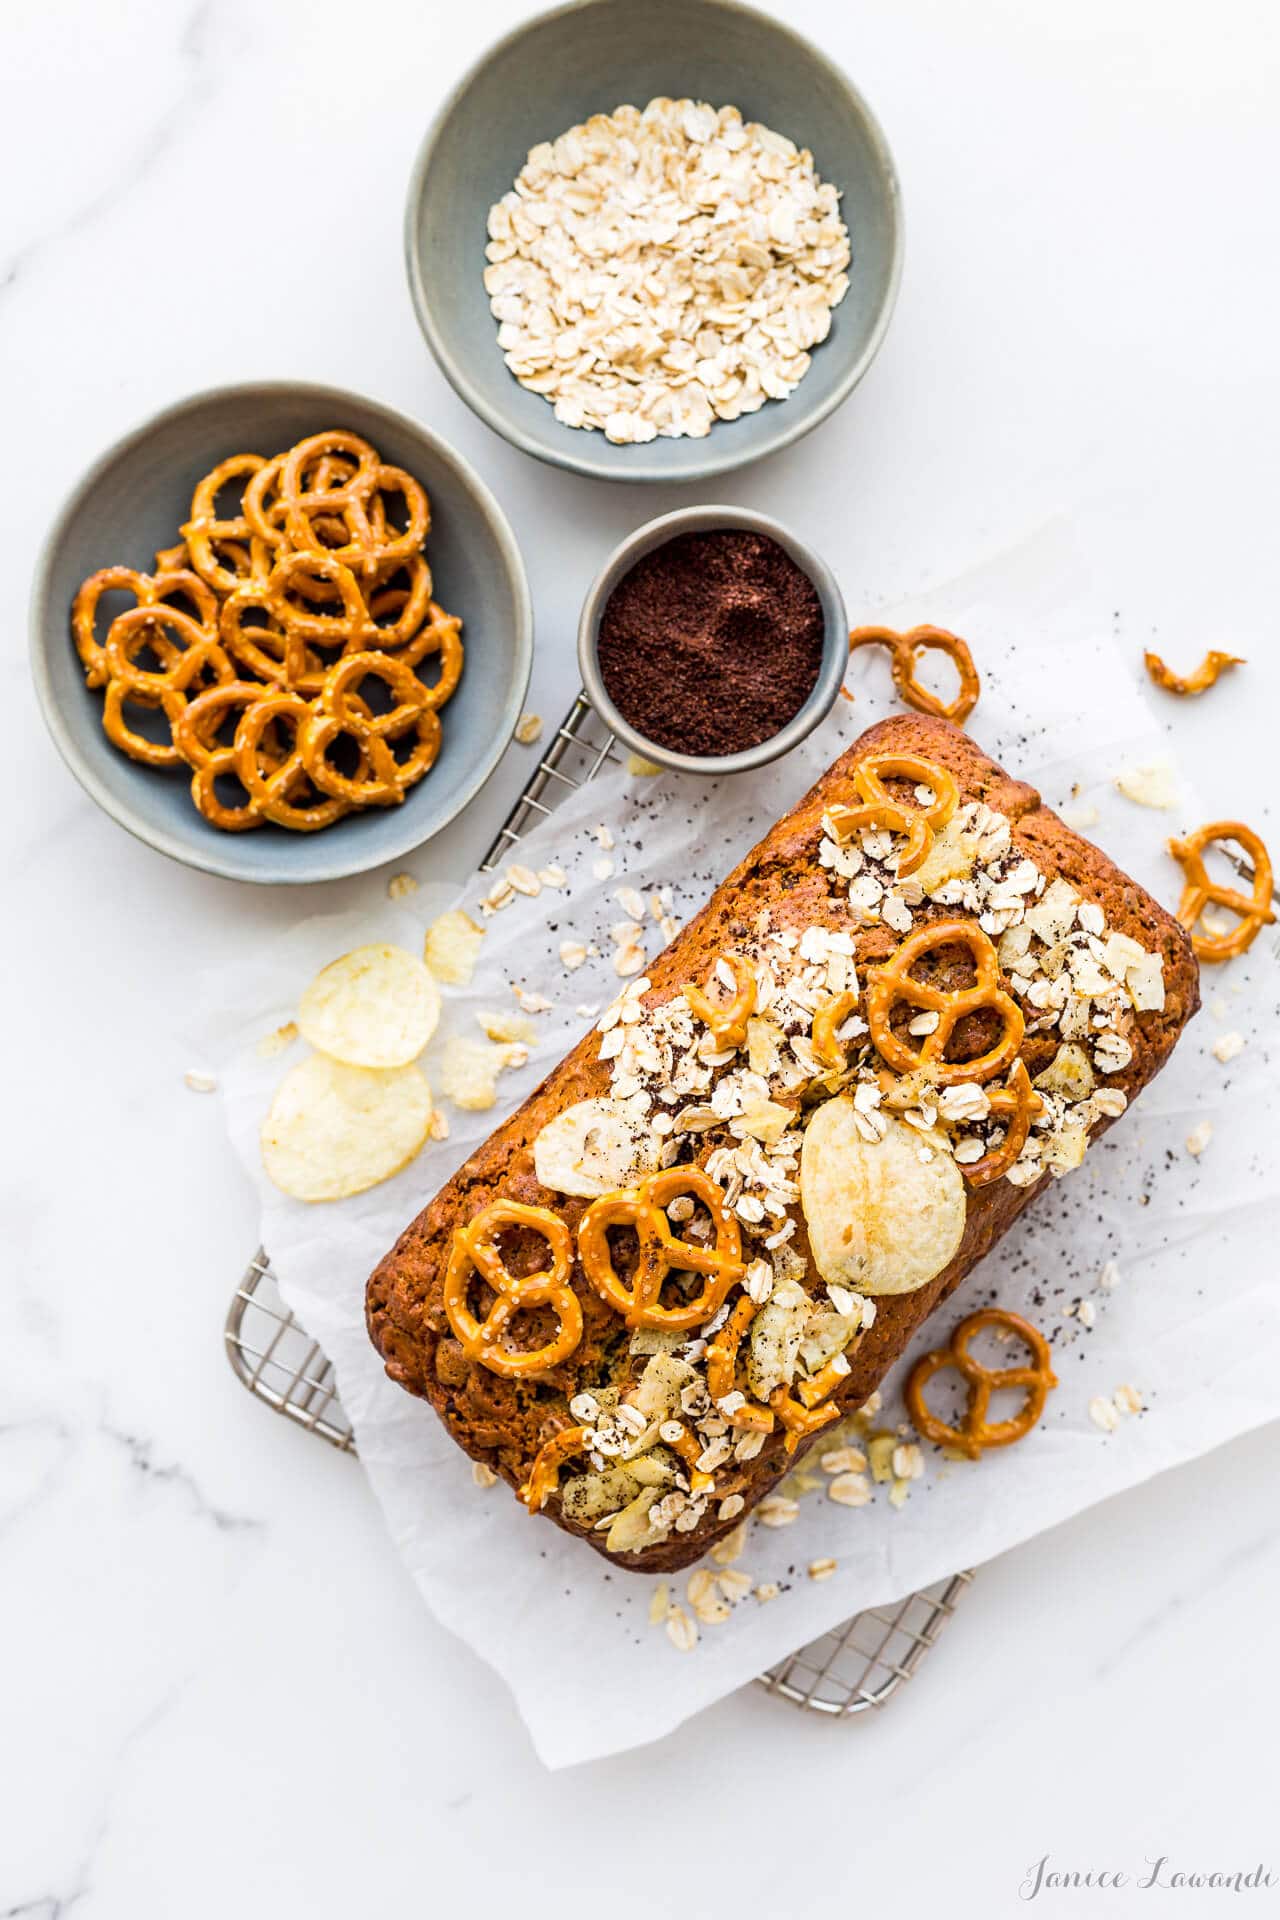 Compost pound cake on parchment on cooling rack topped with potato chips, oats, coffee grinds, and mini pretzels. With grey stoneware bowls filled with oats, pretzels, coffee grinds. 